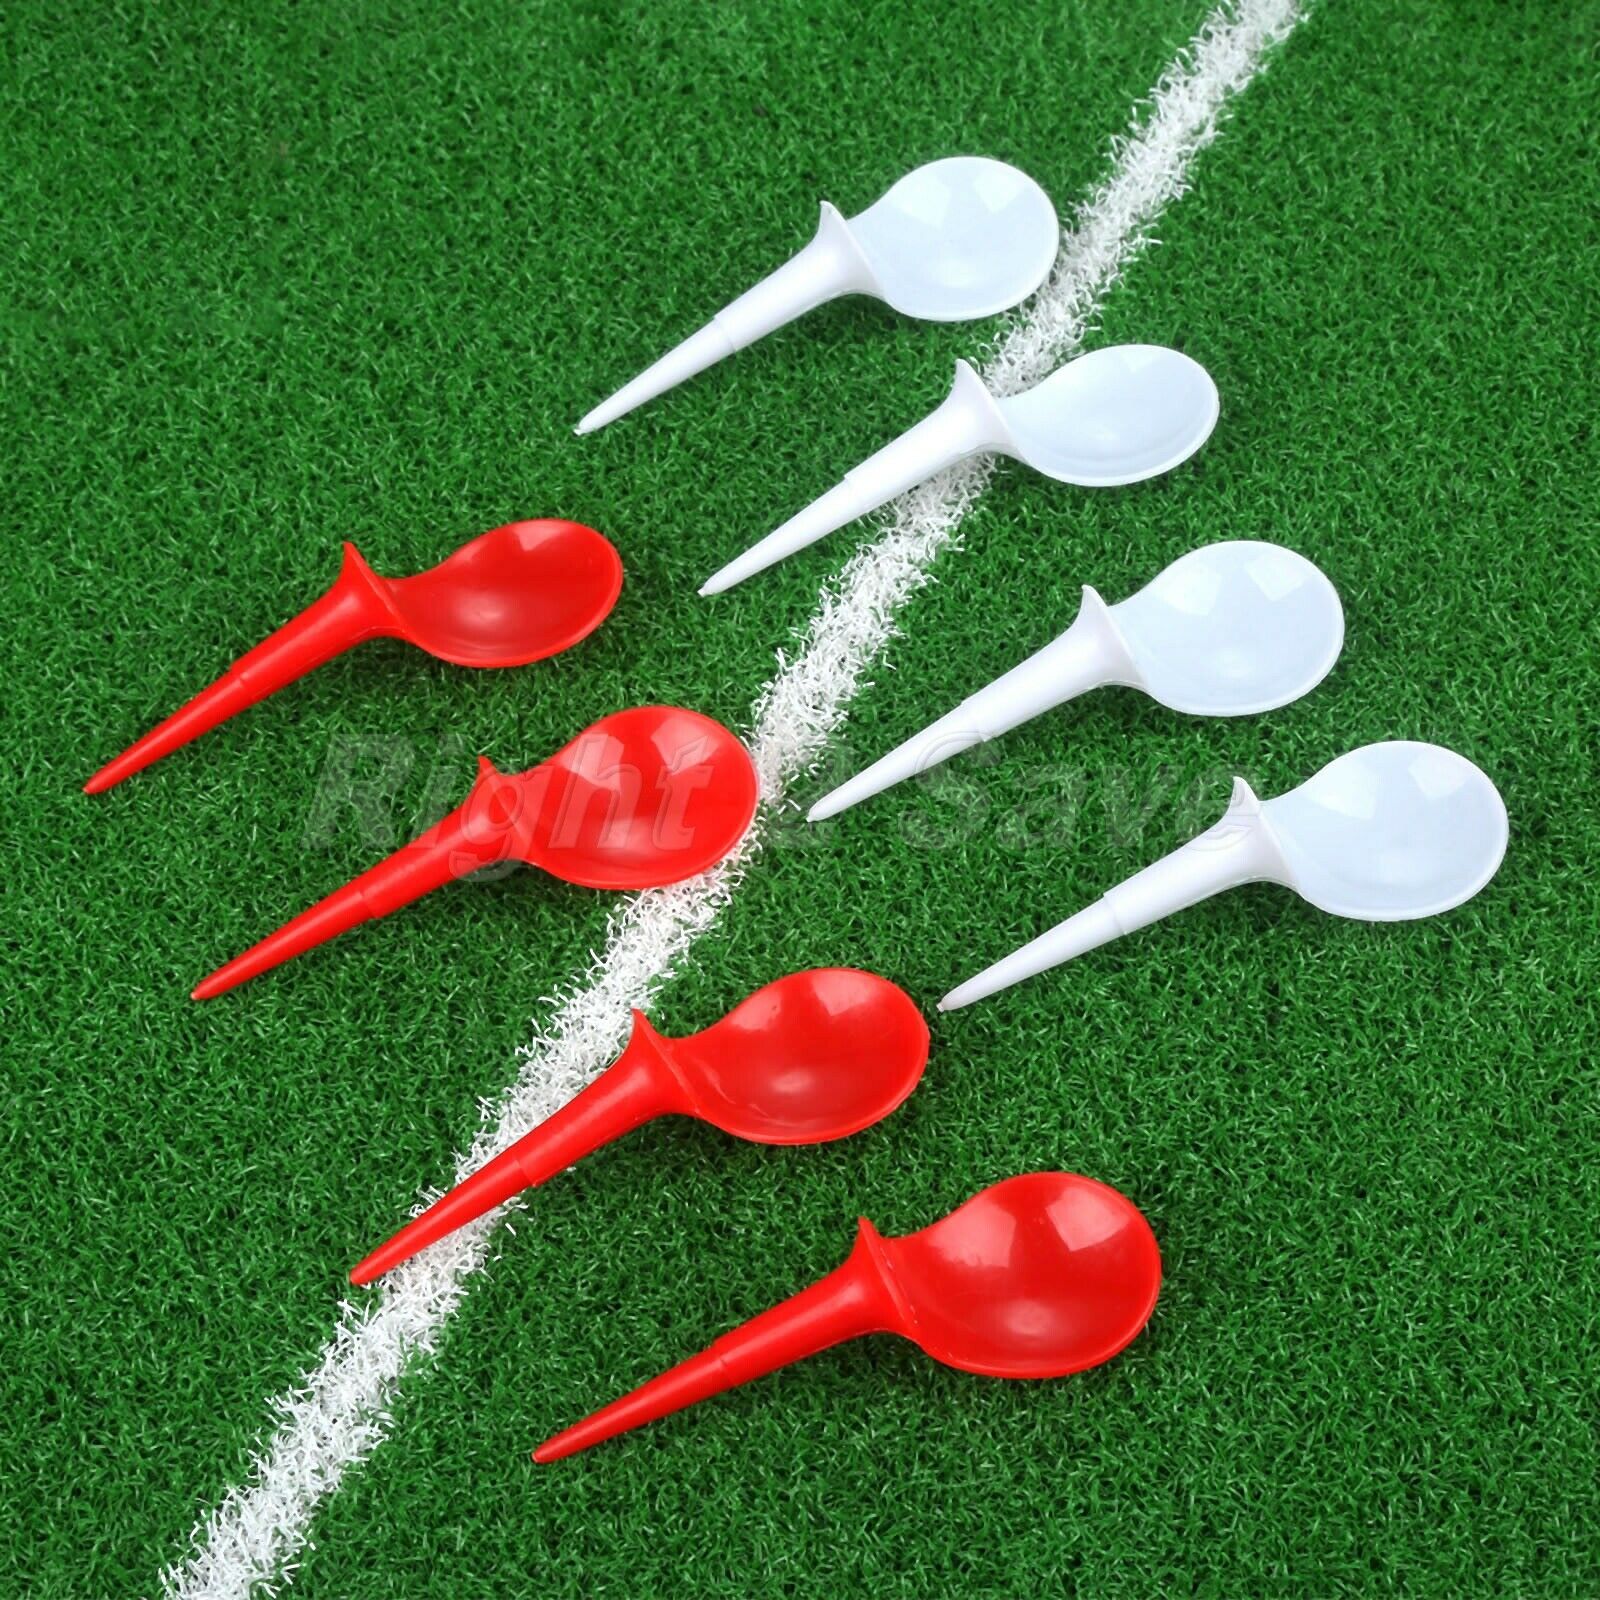 30Pcs Golf Club Accessory Golf Tees Golf Ball Surport Reduce the Effect of Spin